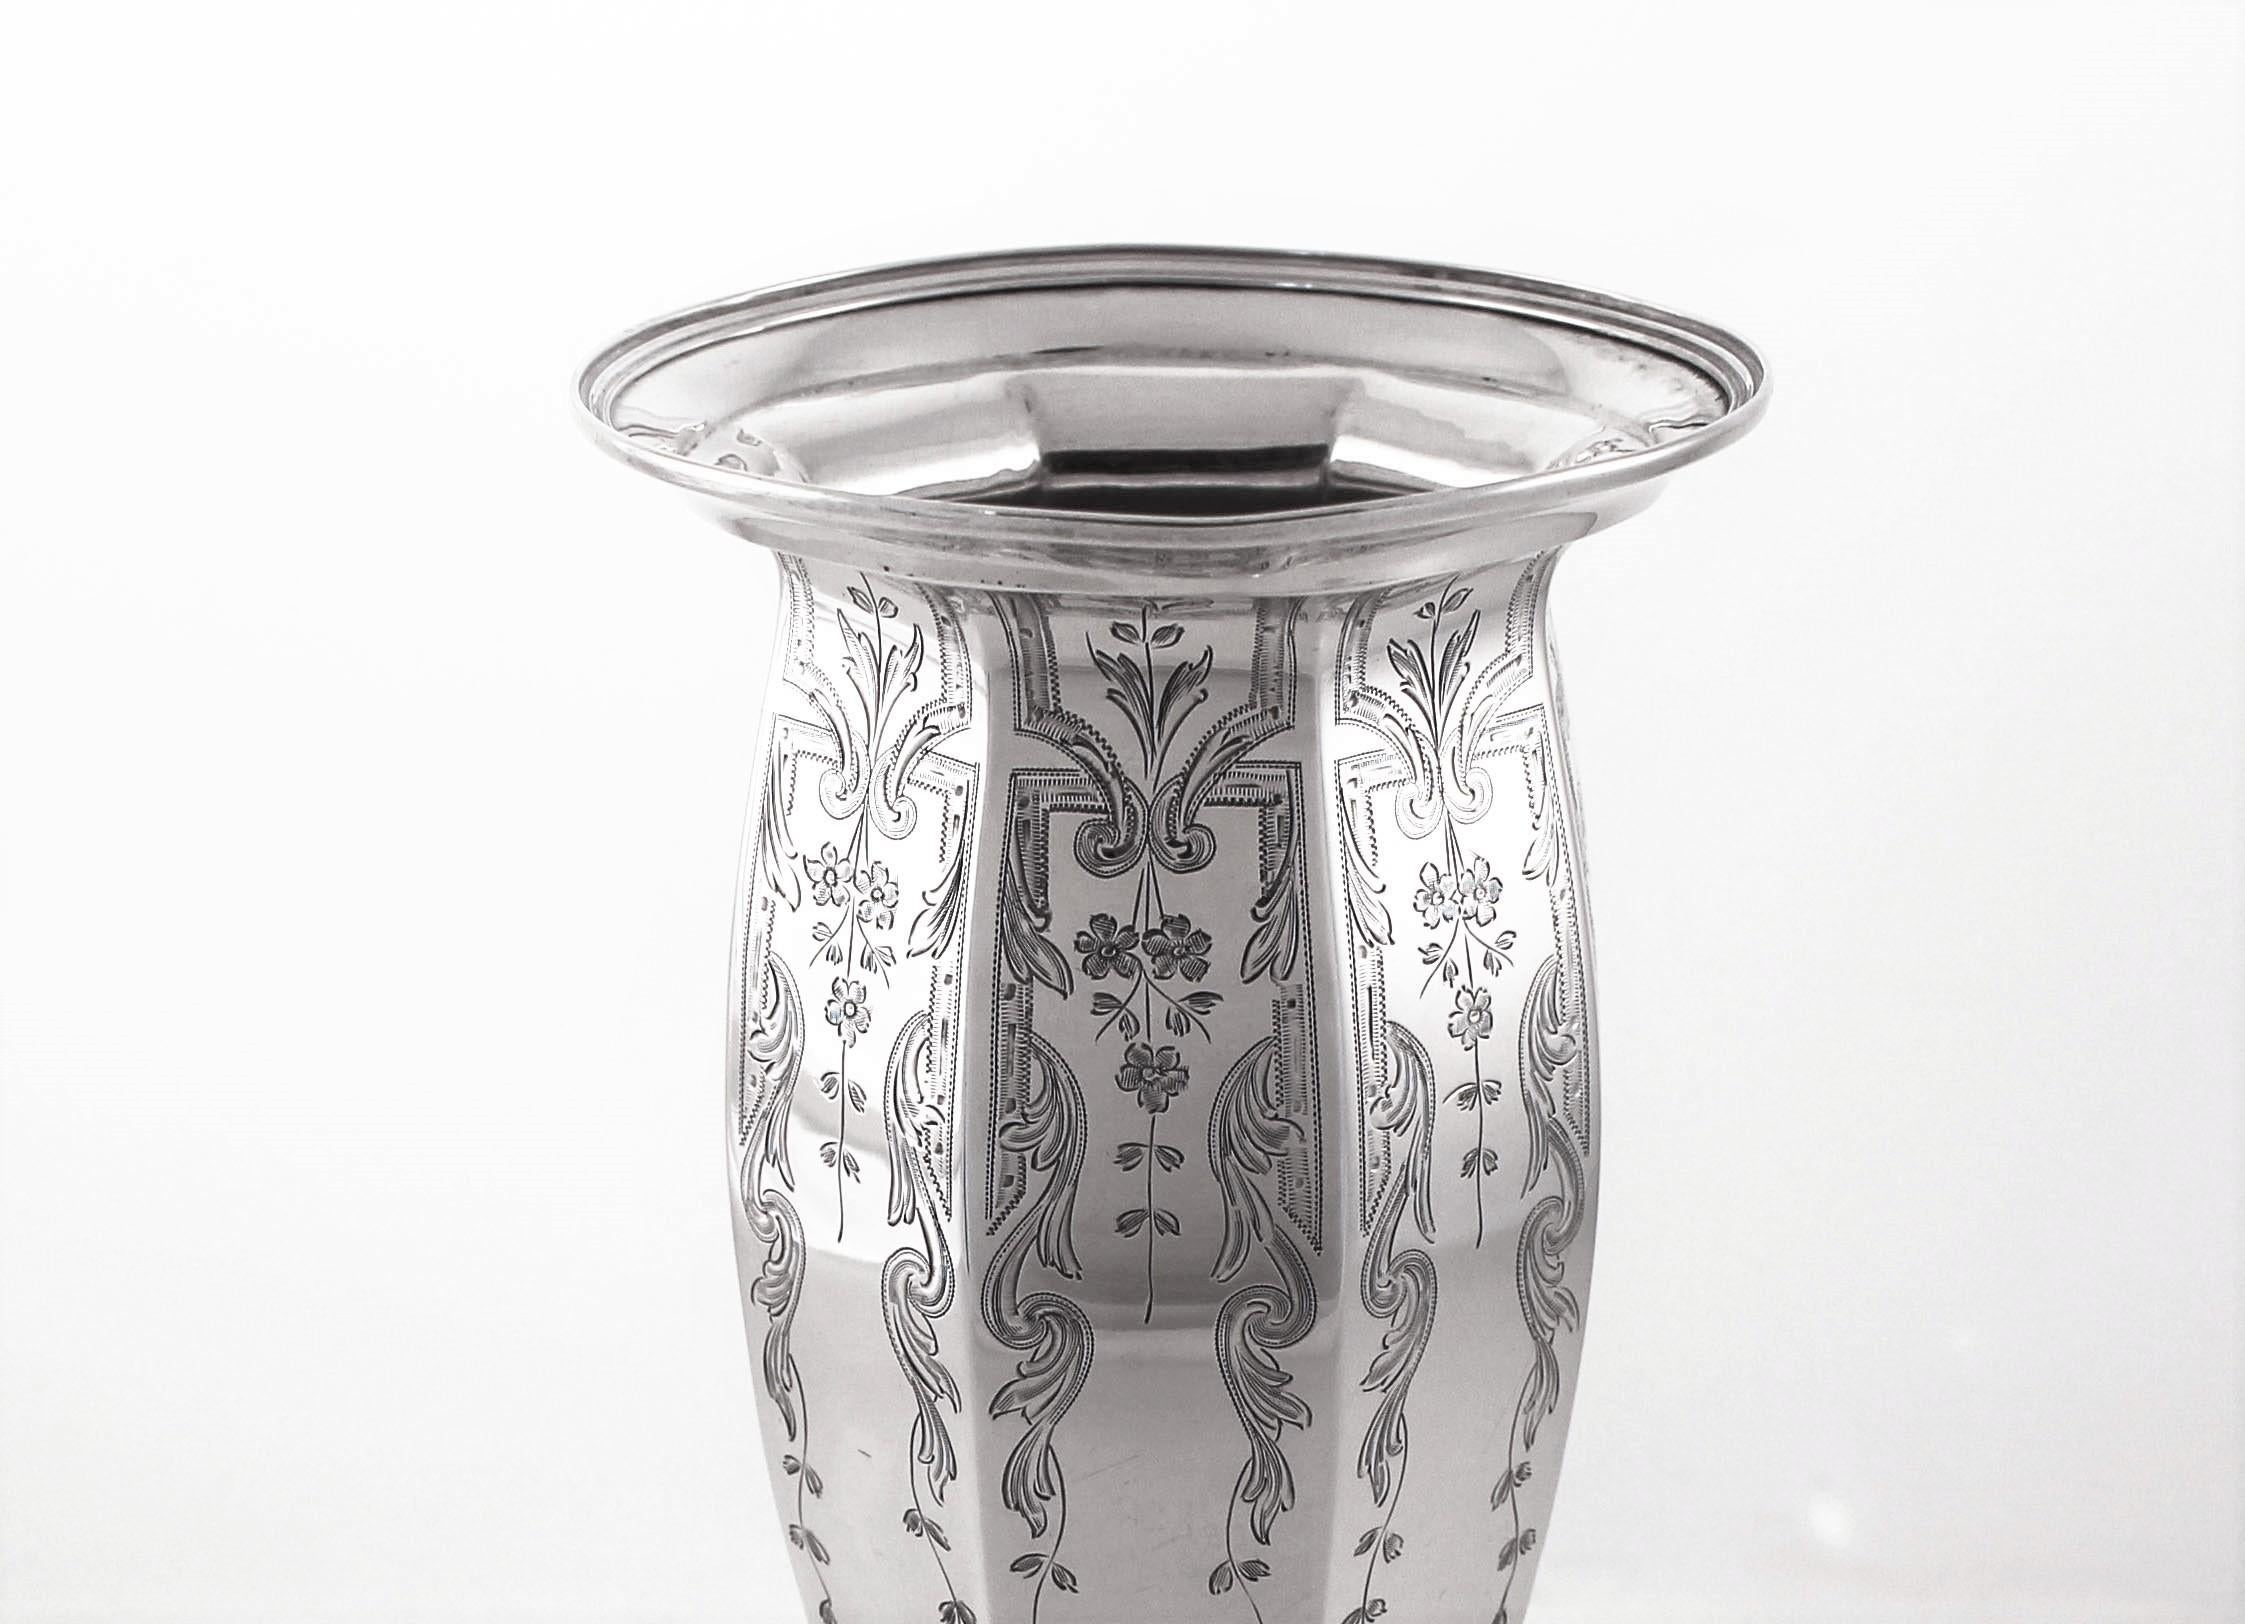 We are thrilled to offer this sterling silver vase by the Watson Silver Company of Massachusetts. It is round in shape but also has paneling and a tailored body; wider on top and narrower on bottom. Starting on top and going towards the base are